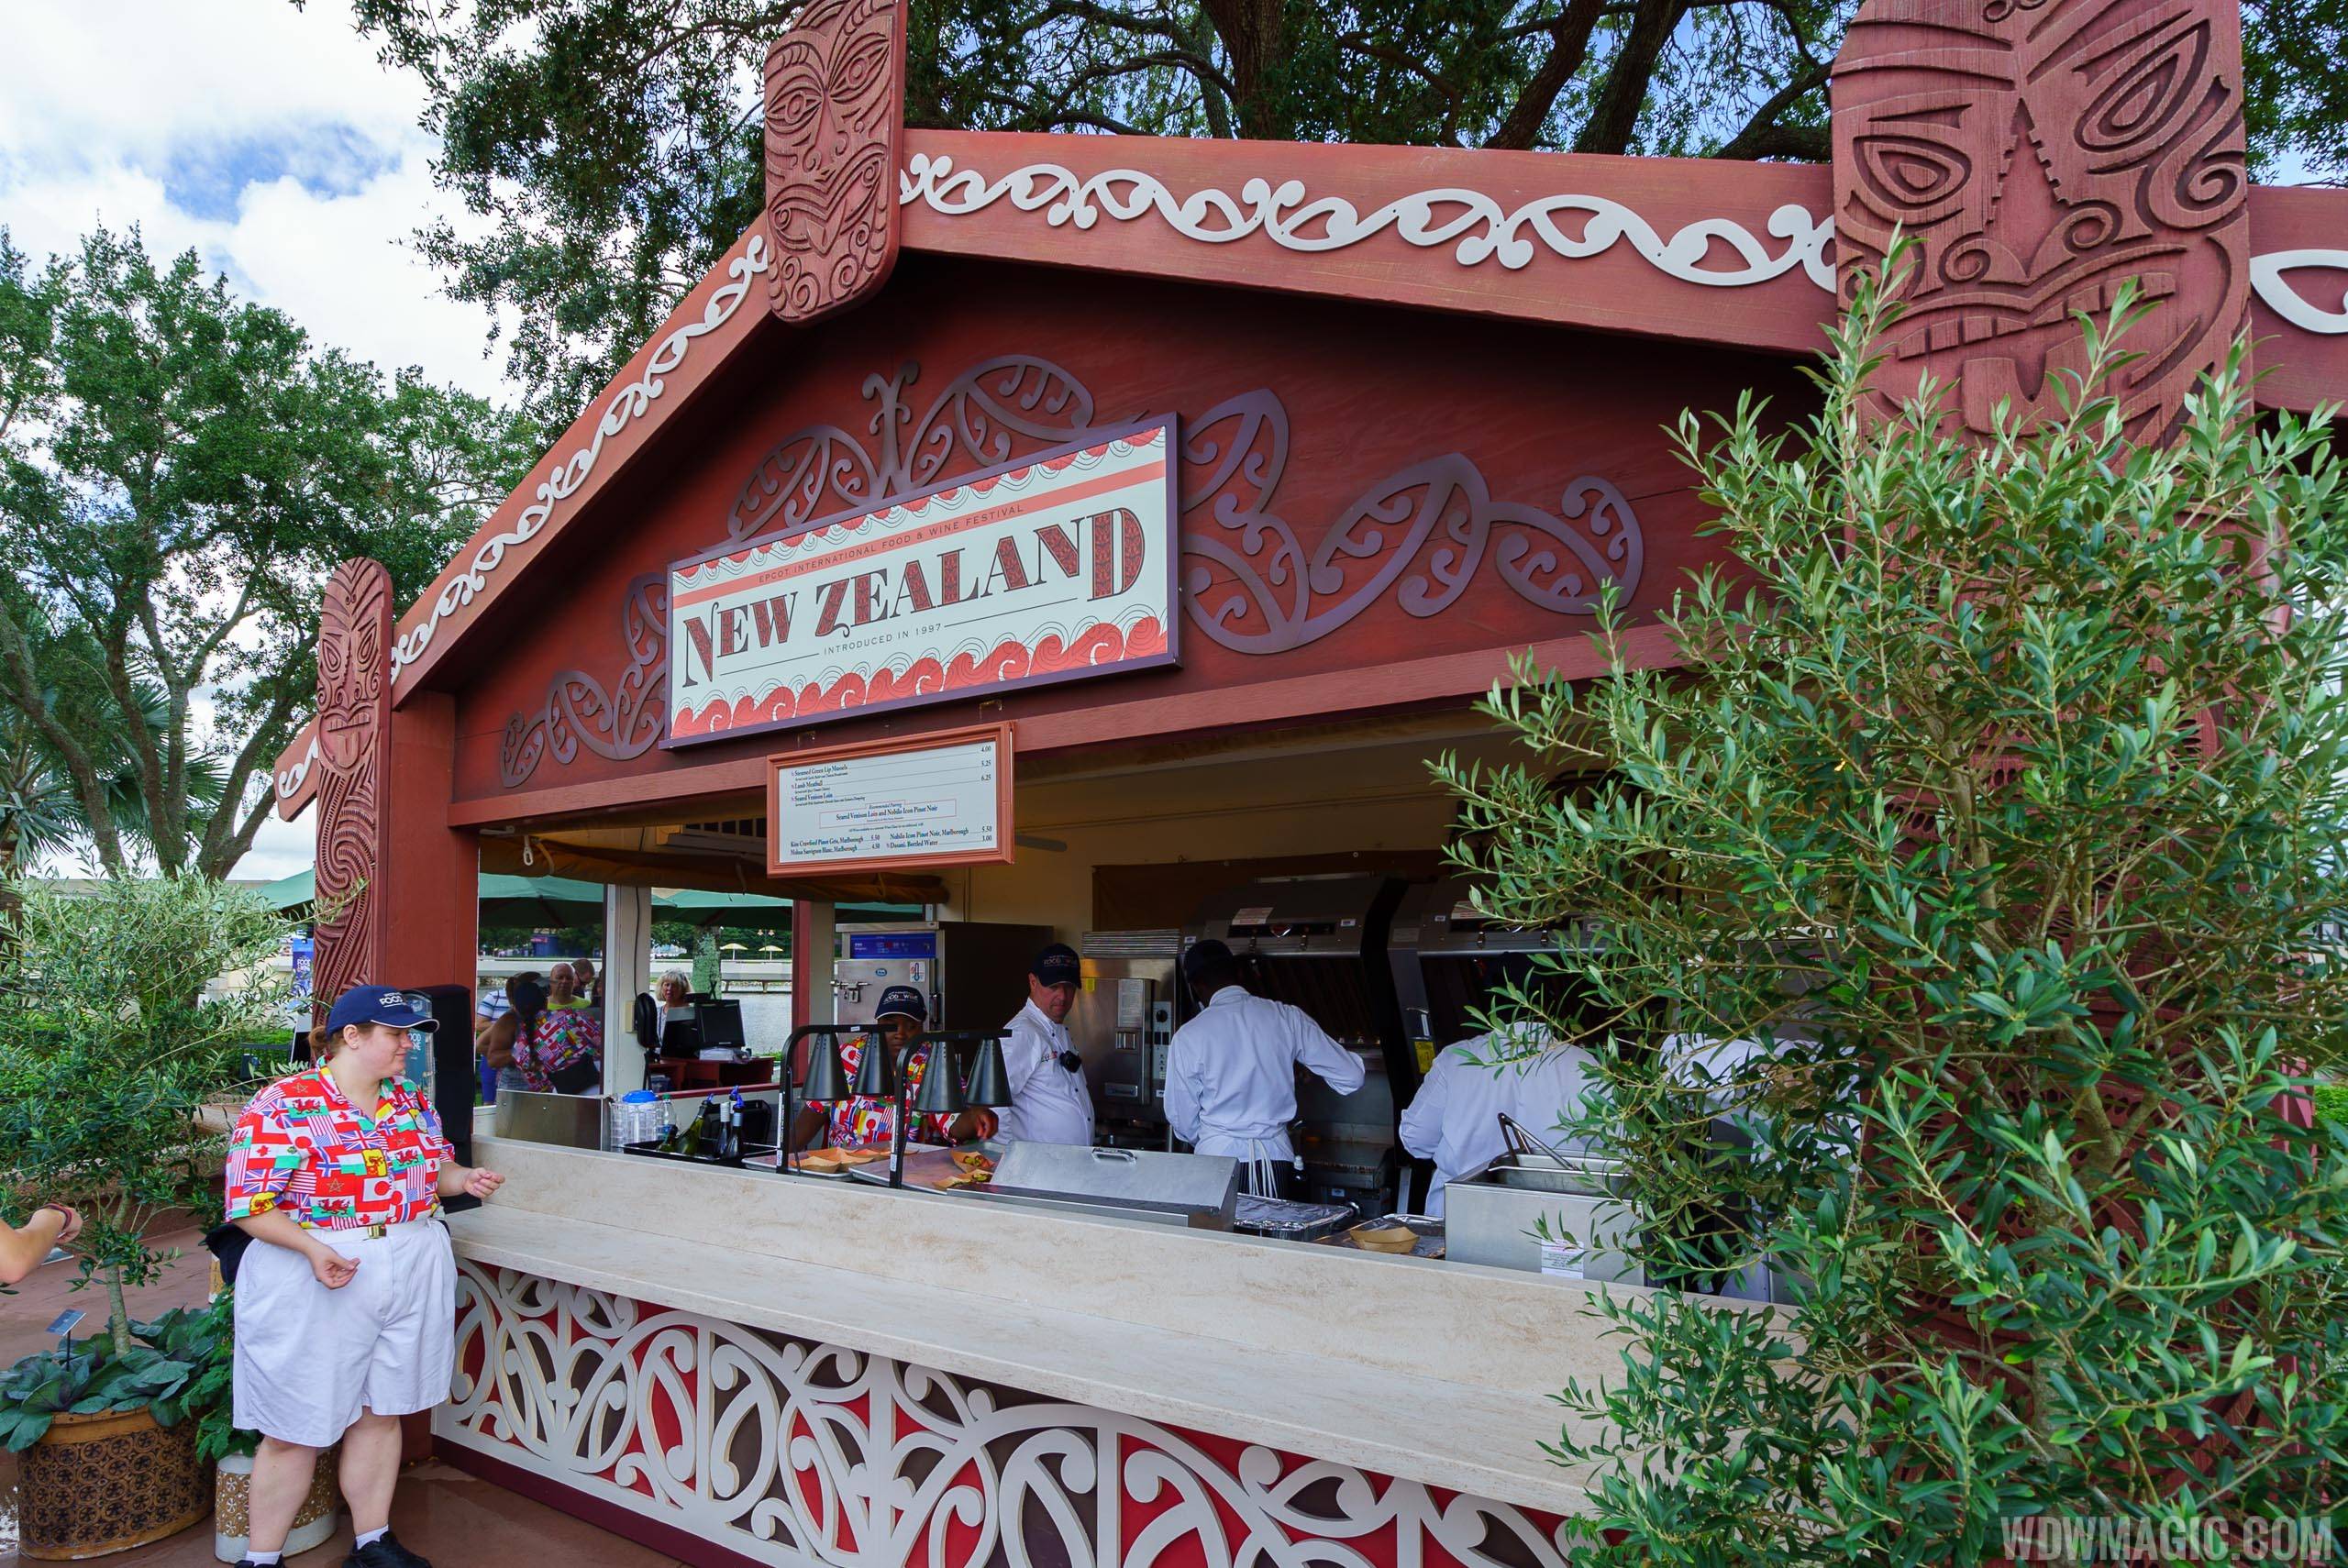 2016 Epcot Food and Wine Festival - New Zealand kiosk